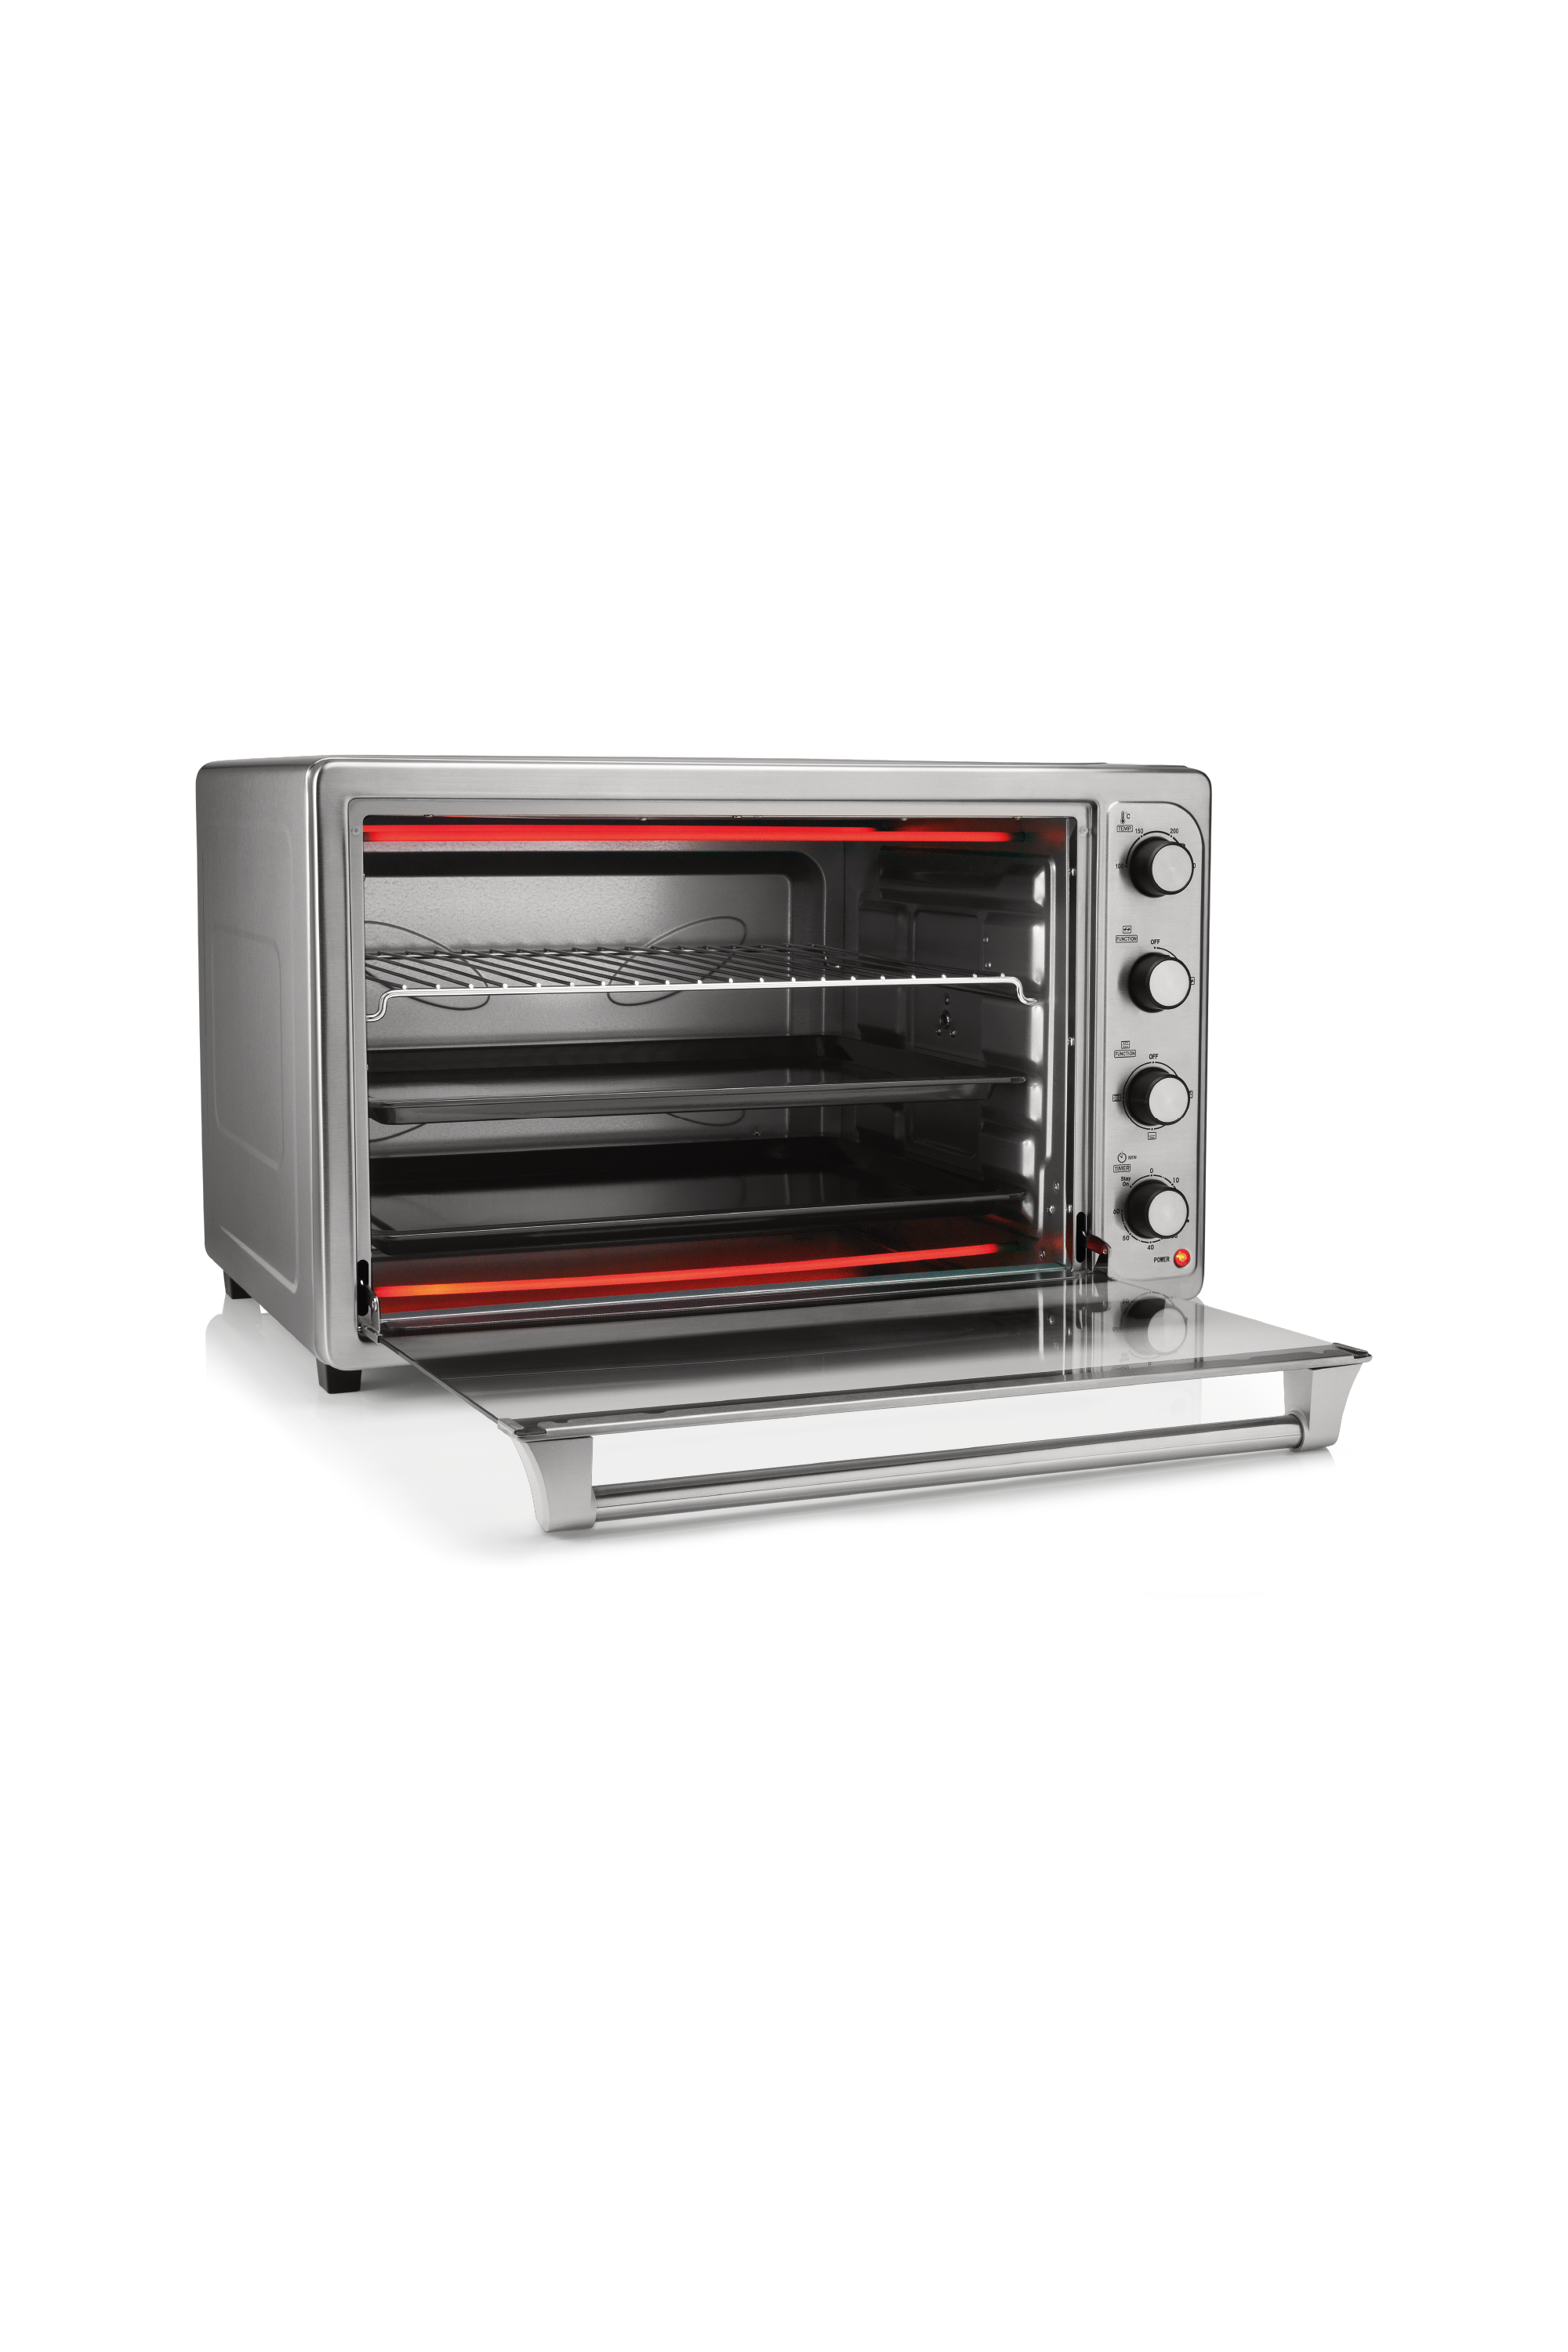 Ov9660 66L Electrical Oven